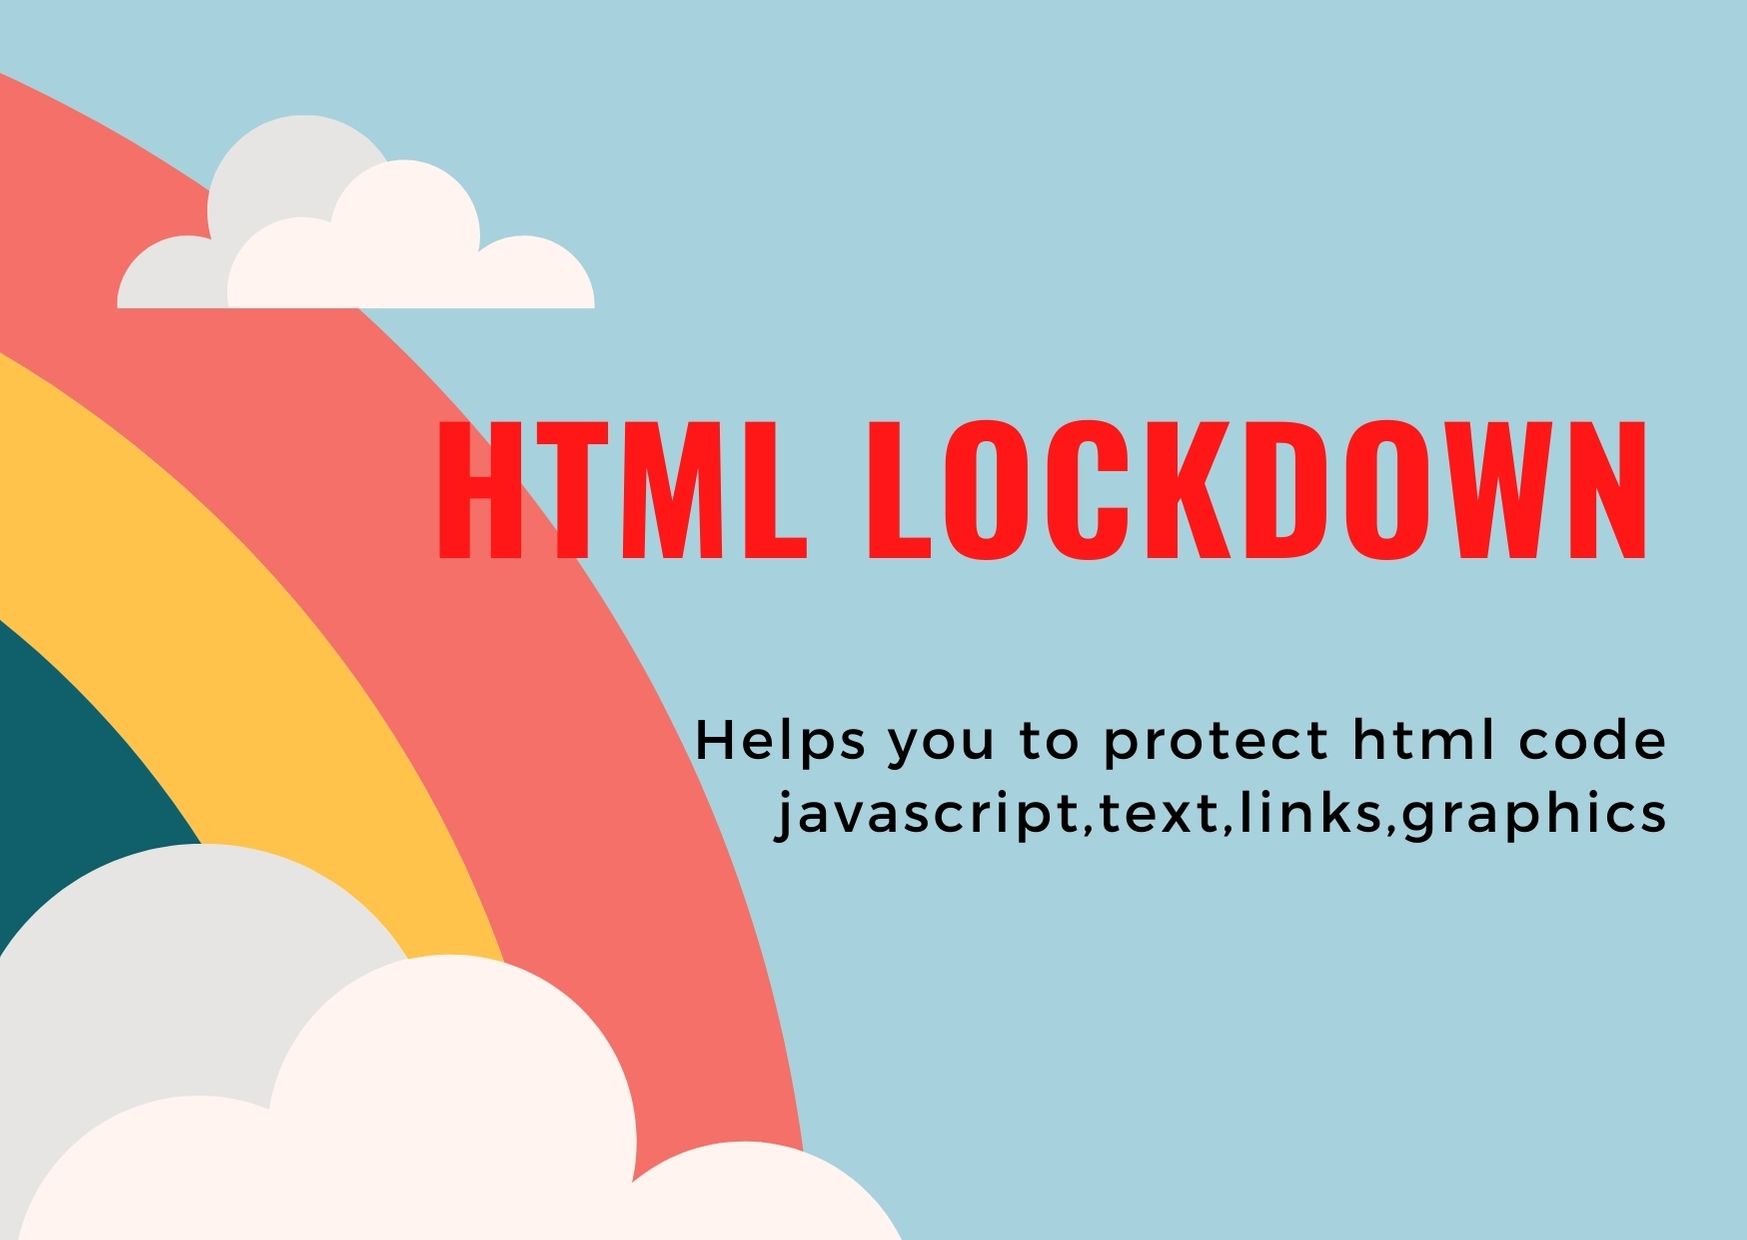 Html lock down, helps to protect html code, java script, text, links, graphics